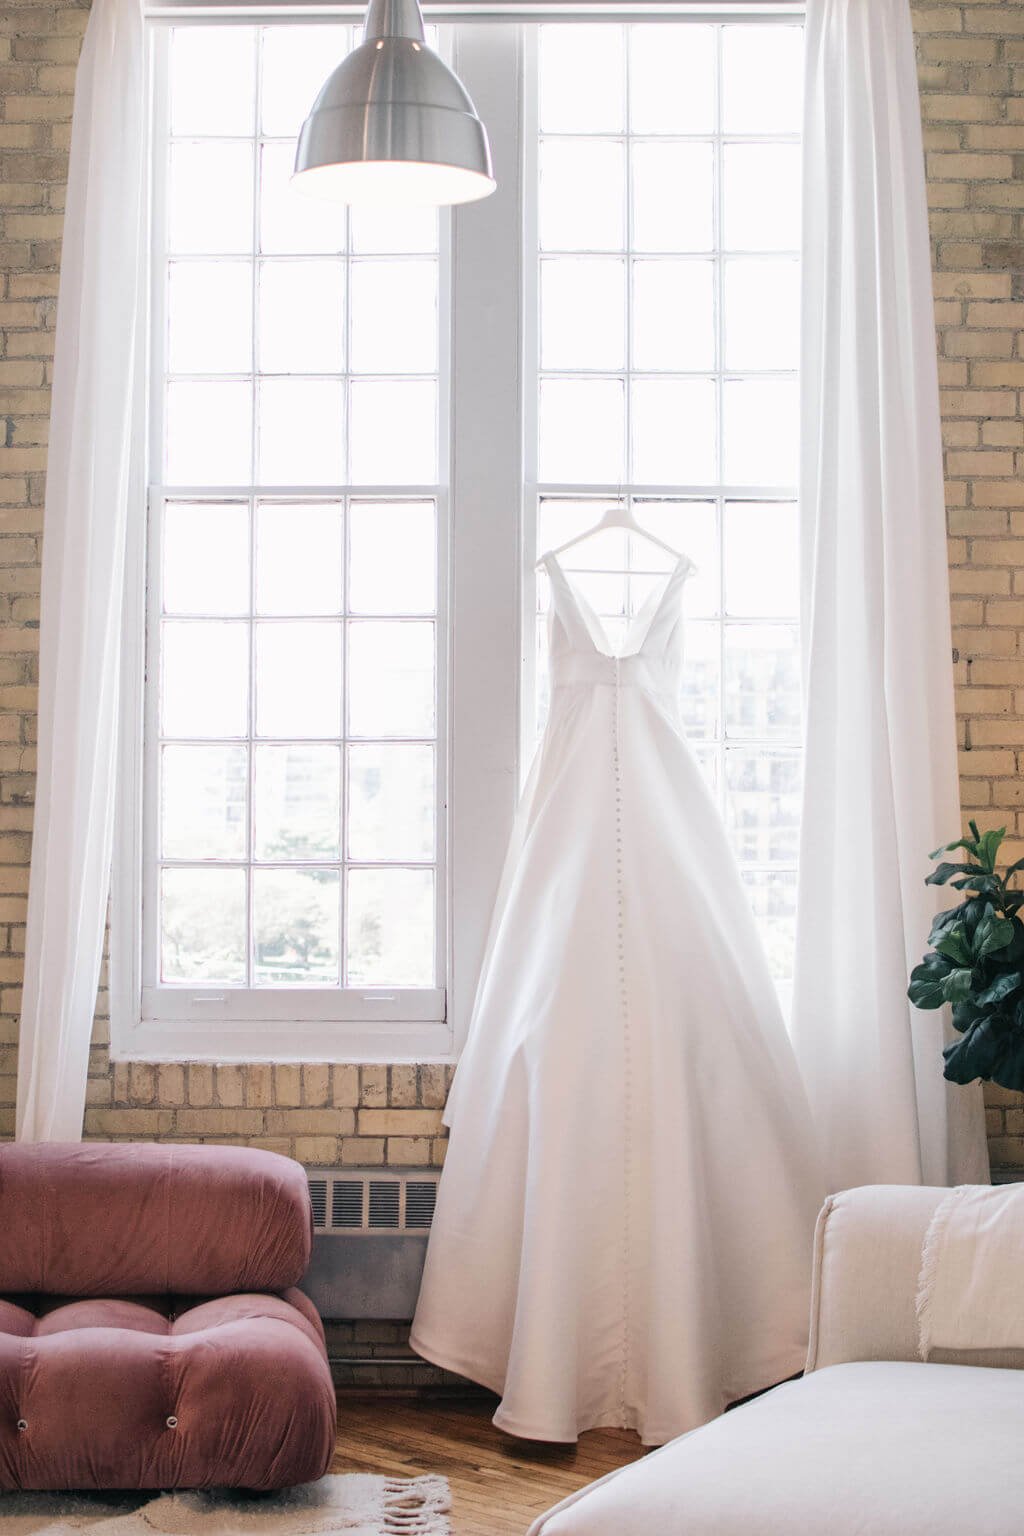 TImeless summer wedding day in downtown Toronto by Toronto wedding photographers, Ugo Photography